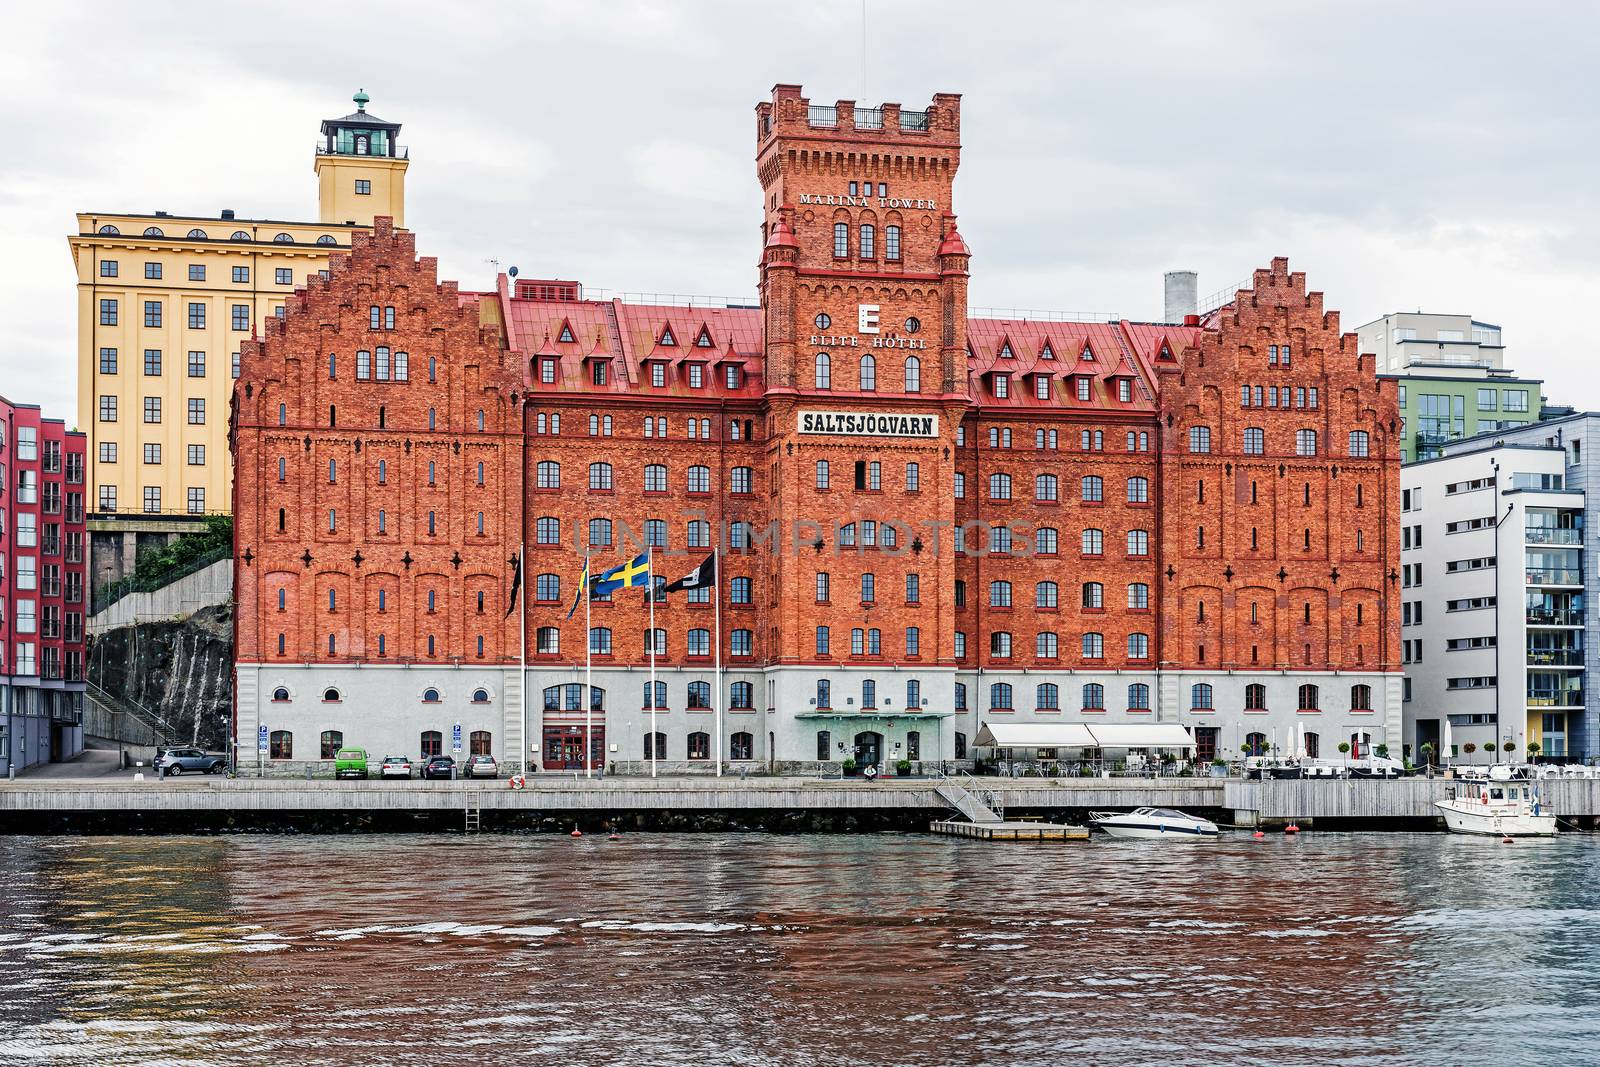 Elite Hotel Marina Tower in Stockholm located in a historical mill on the waterfront. The hotel offers 186 furnished hotel rooms, a restaurant and spa facility.